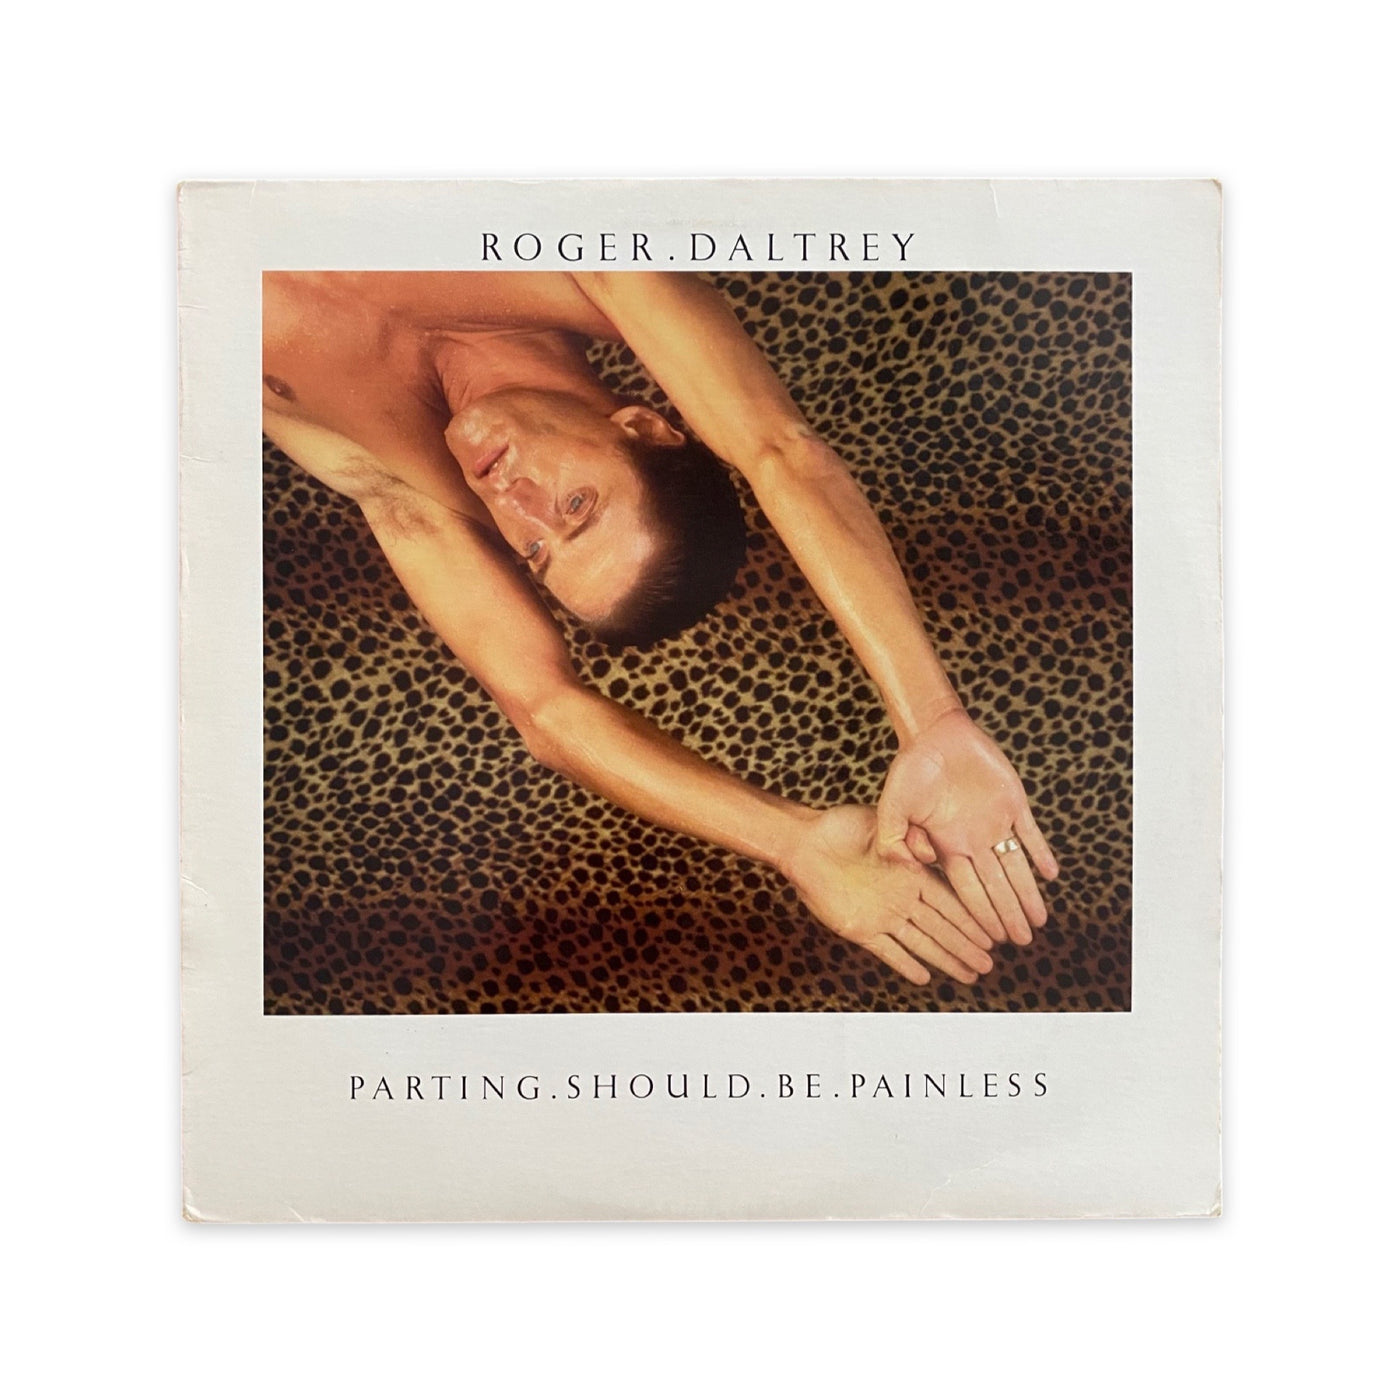 Roger Daltrey - Parting Should Be Painless